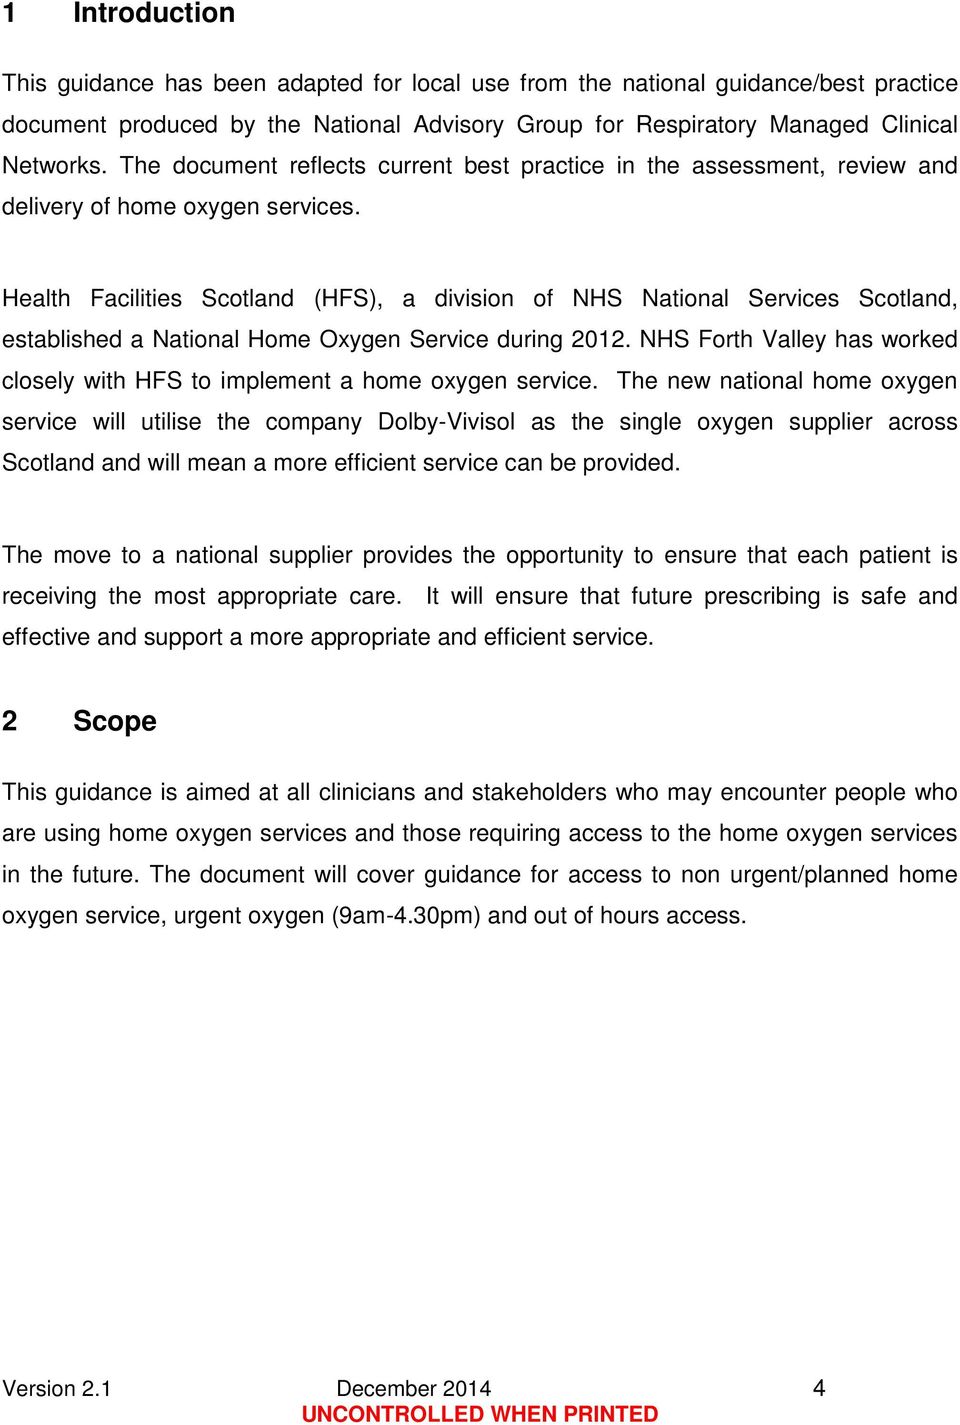 Health Facilities Scotland (HFS), a division of NHS National Services Scotland, established a National Home Oxygen Service during 2012.